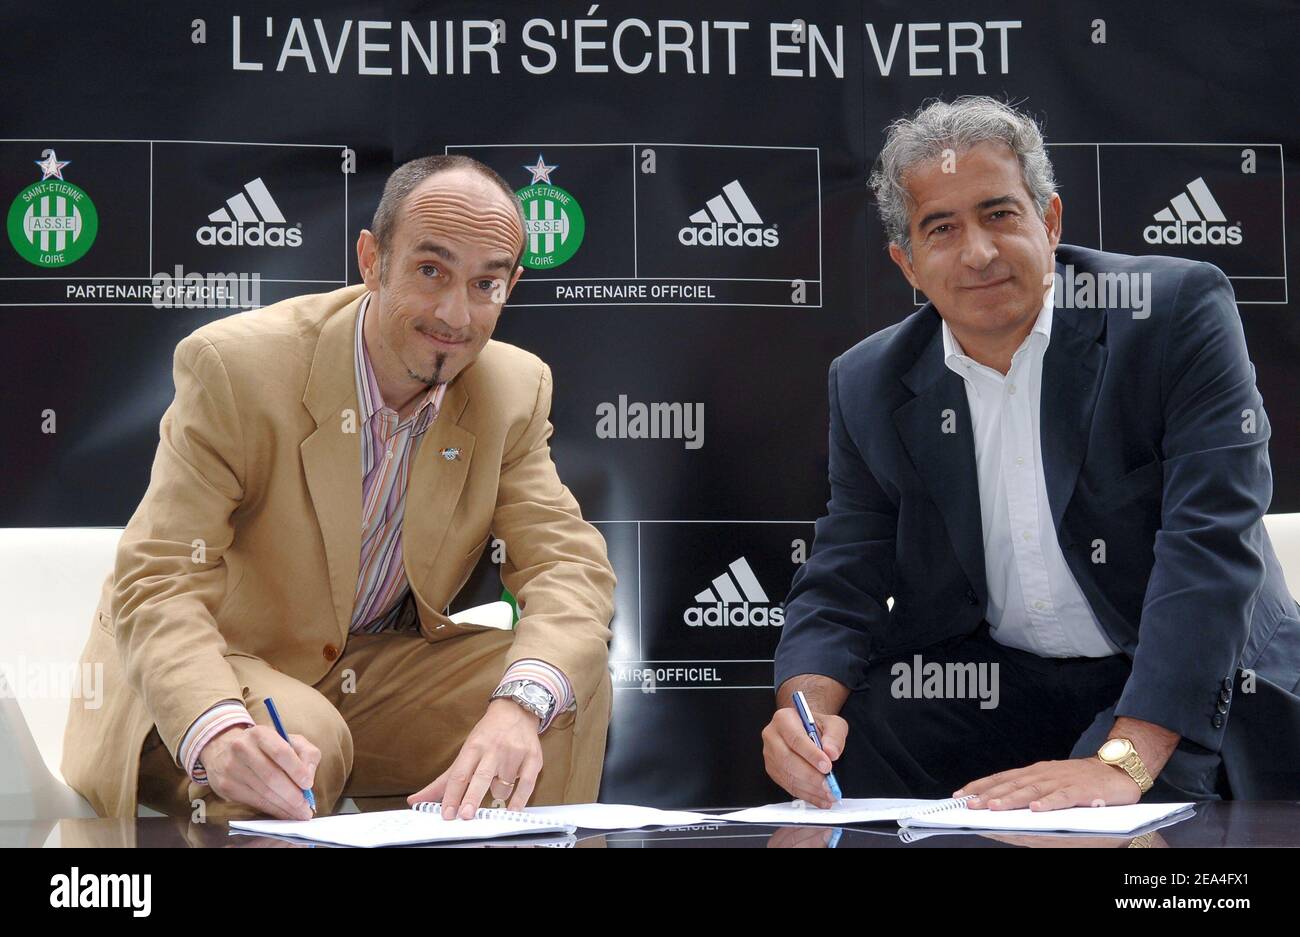 Antoine Sathicq, CEO of Adidas France and Bernard Caiazzo, President of the  'Association Sportive de Saint-Etienne' football club sign a new  partnership for five seasons, at Geoffroy Guichard stadium, in  Saint-Etienne, France,